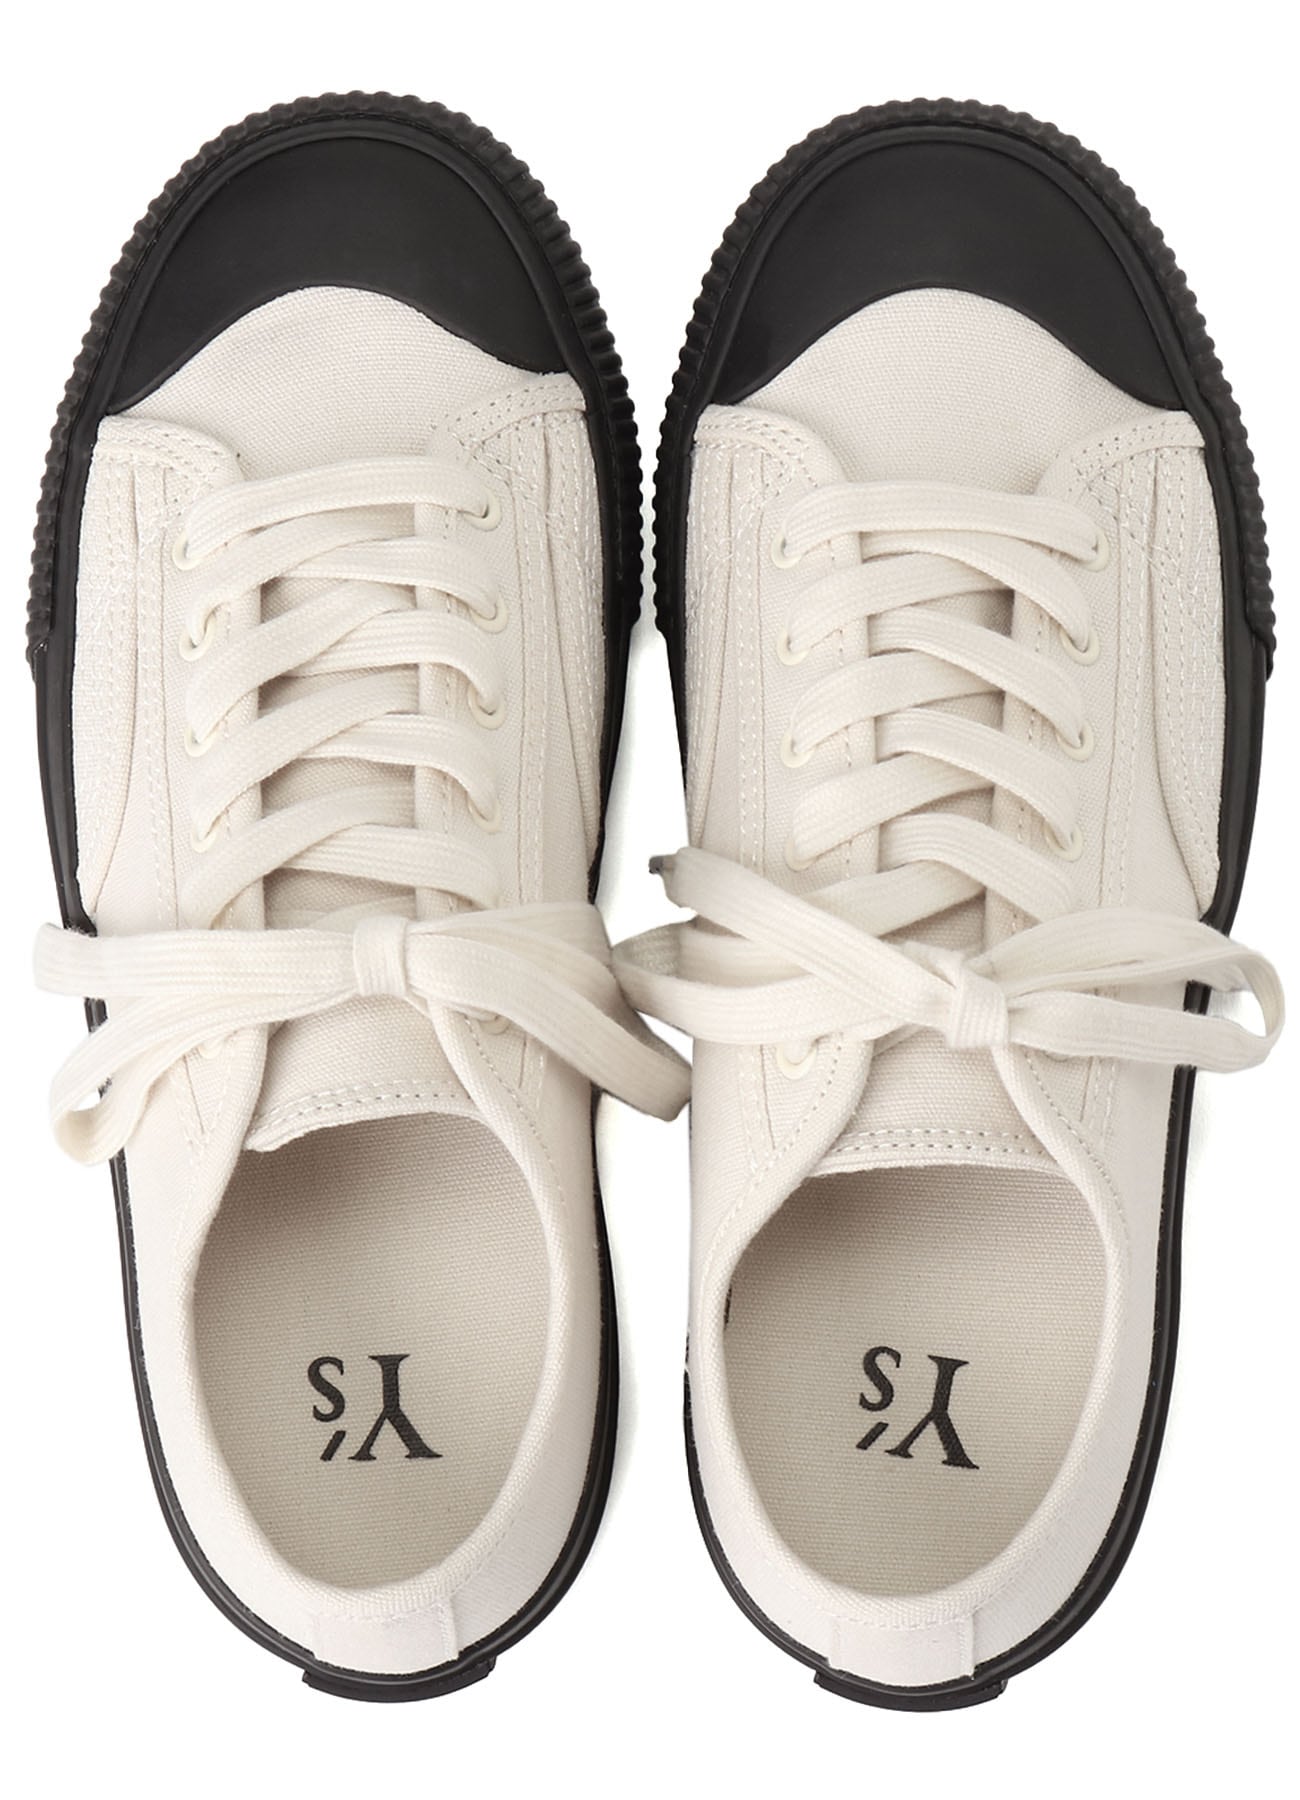 NO.9 CANVAS FLAT SNEAKERS(22.5 OFF WHITE): Vintage 1.1｜THE SHOP 